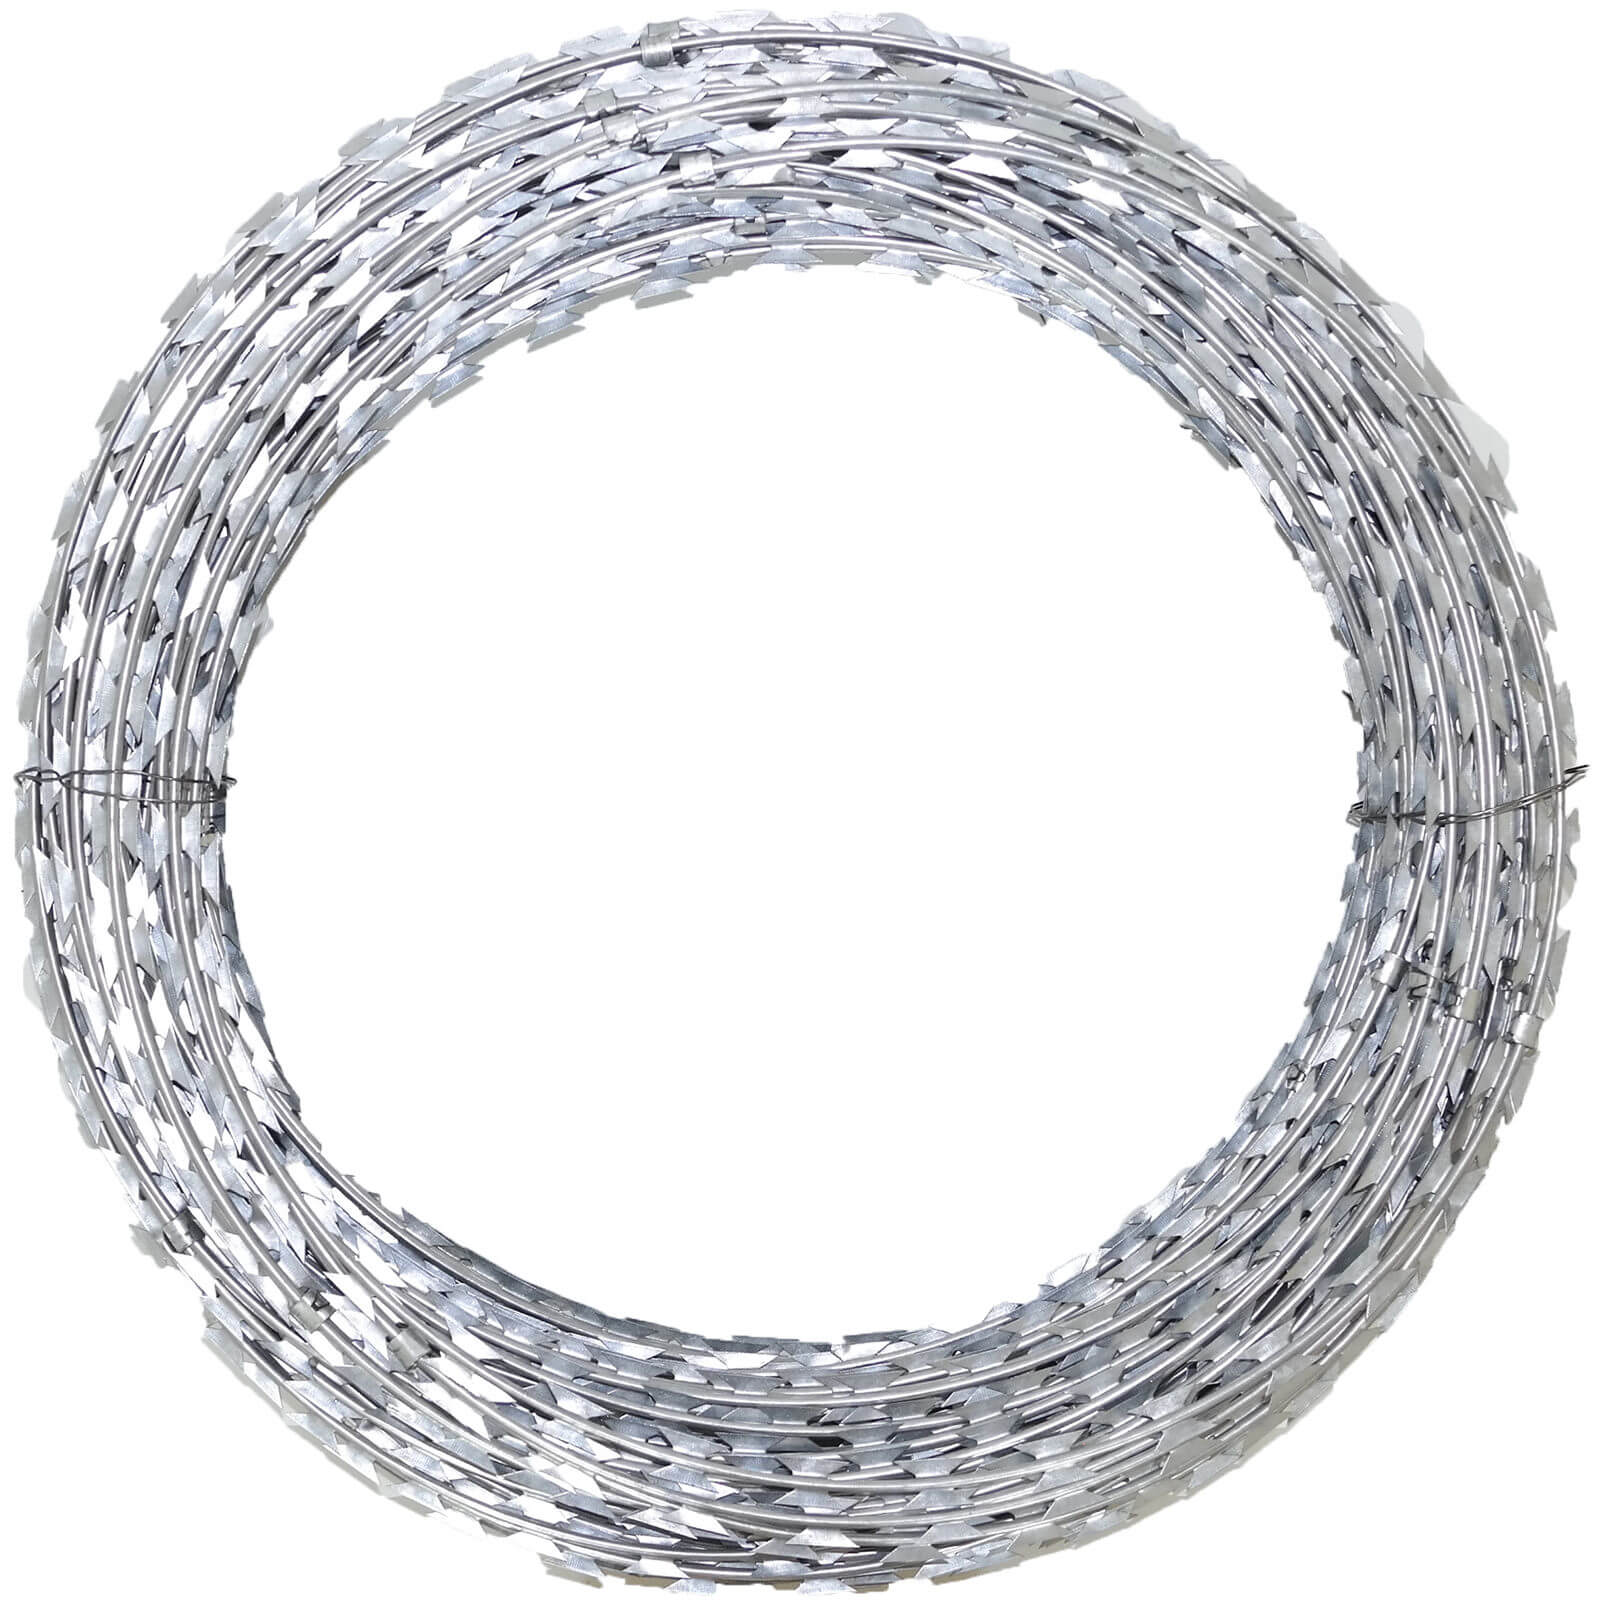 Ensure your safety with razor wire fencing